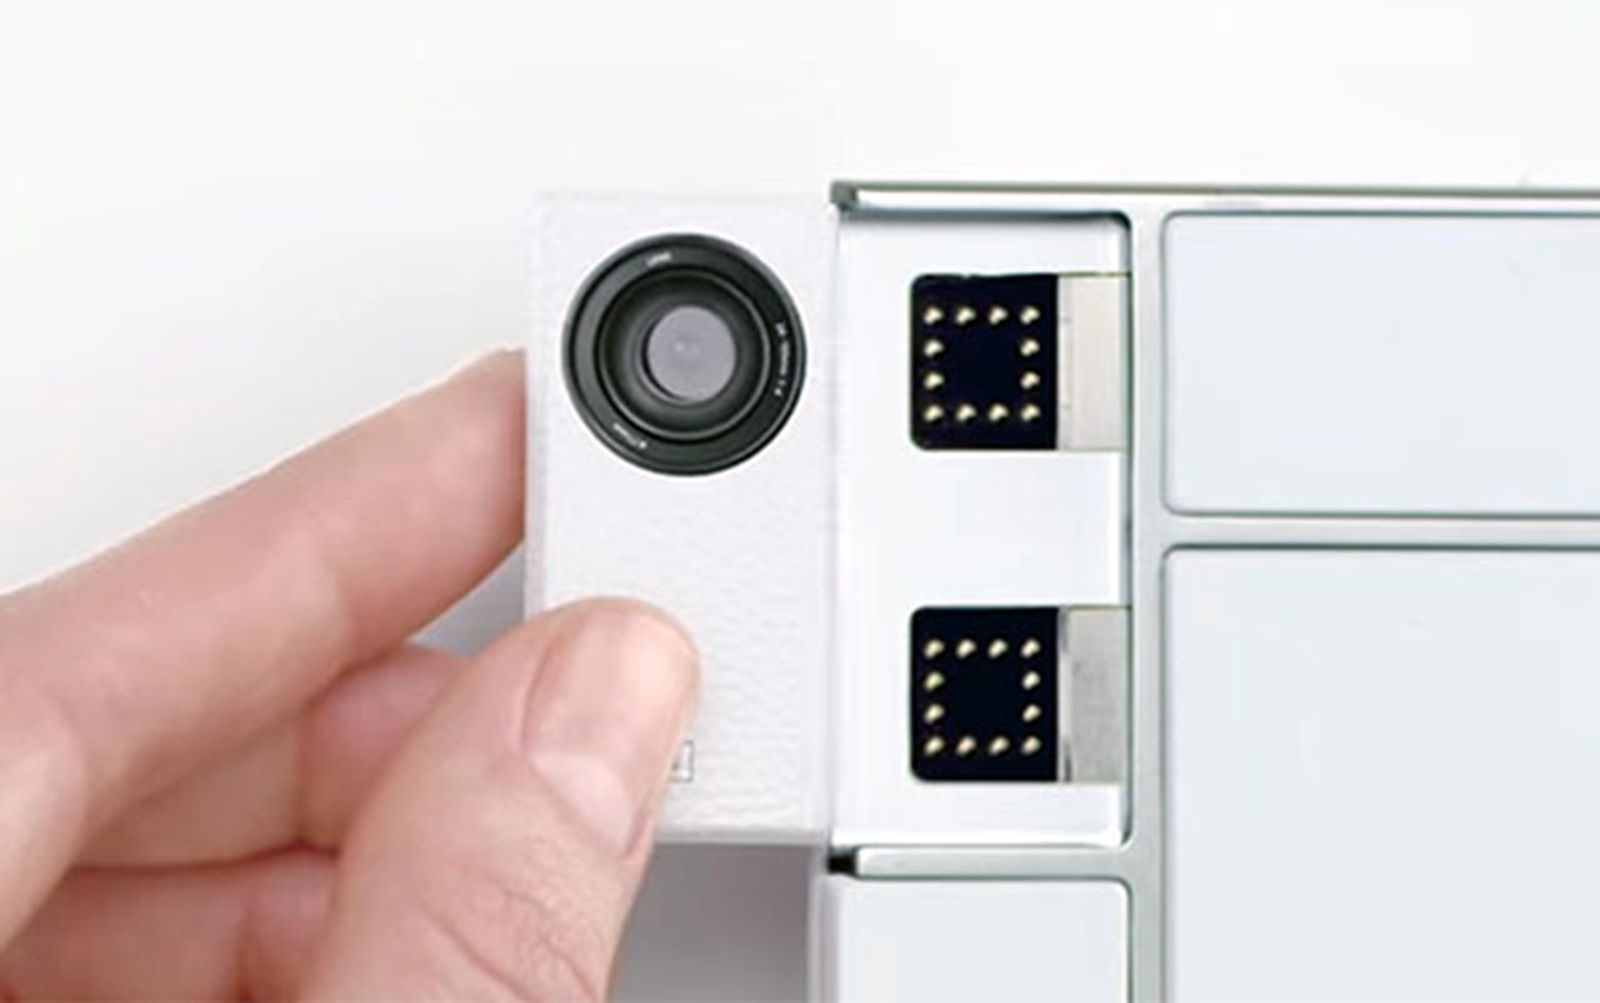 google project ara camera modules revealed for easy swap out upgrades image 1